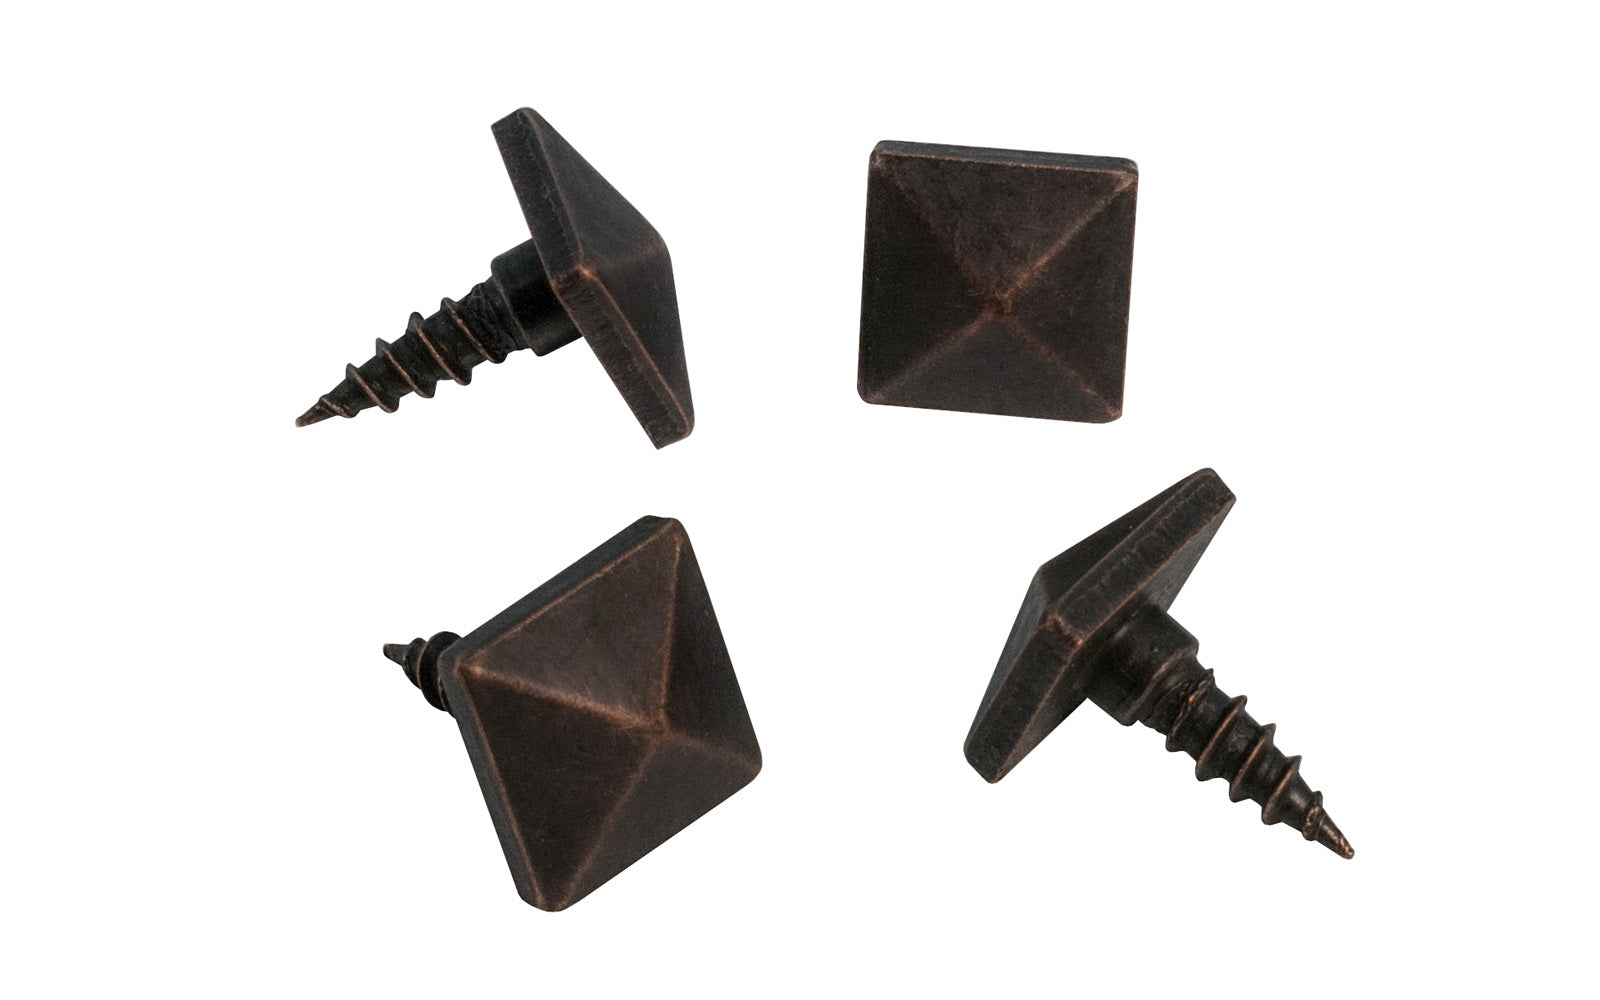 Pyramid head screws in an antique copper finish. Great screws for Mission or Arts & Crafts, Gustav Stickley style hardware. Traditional & classic vintage-style wood screws. 4 PCS in bag. 1/2"  x  1/2"  size square head. 1/2" shank length. 848096000203. Dark antique copper finish